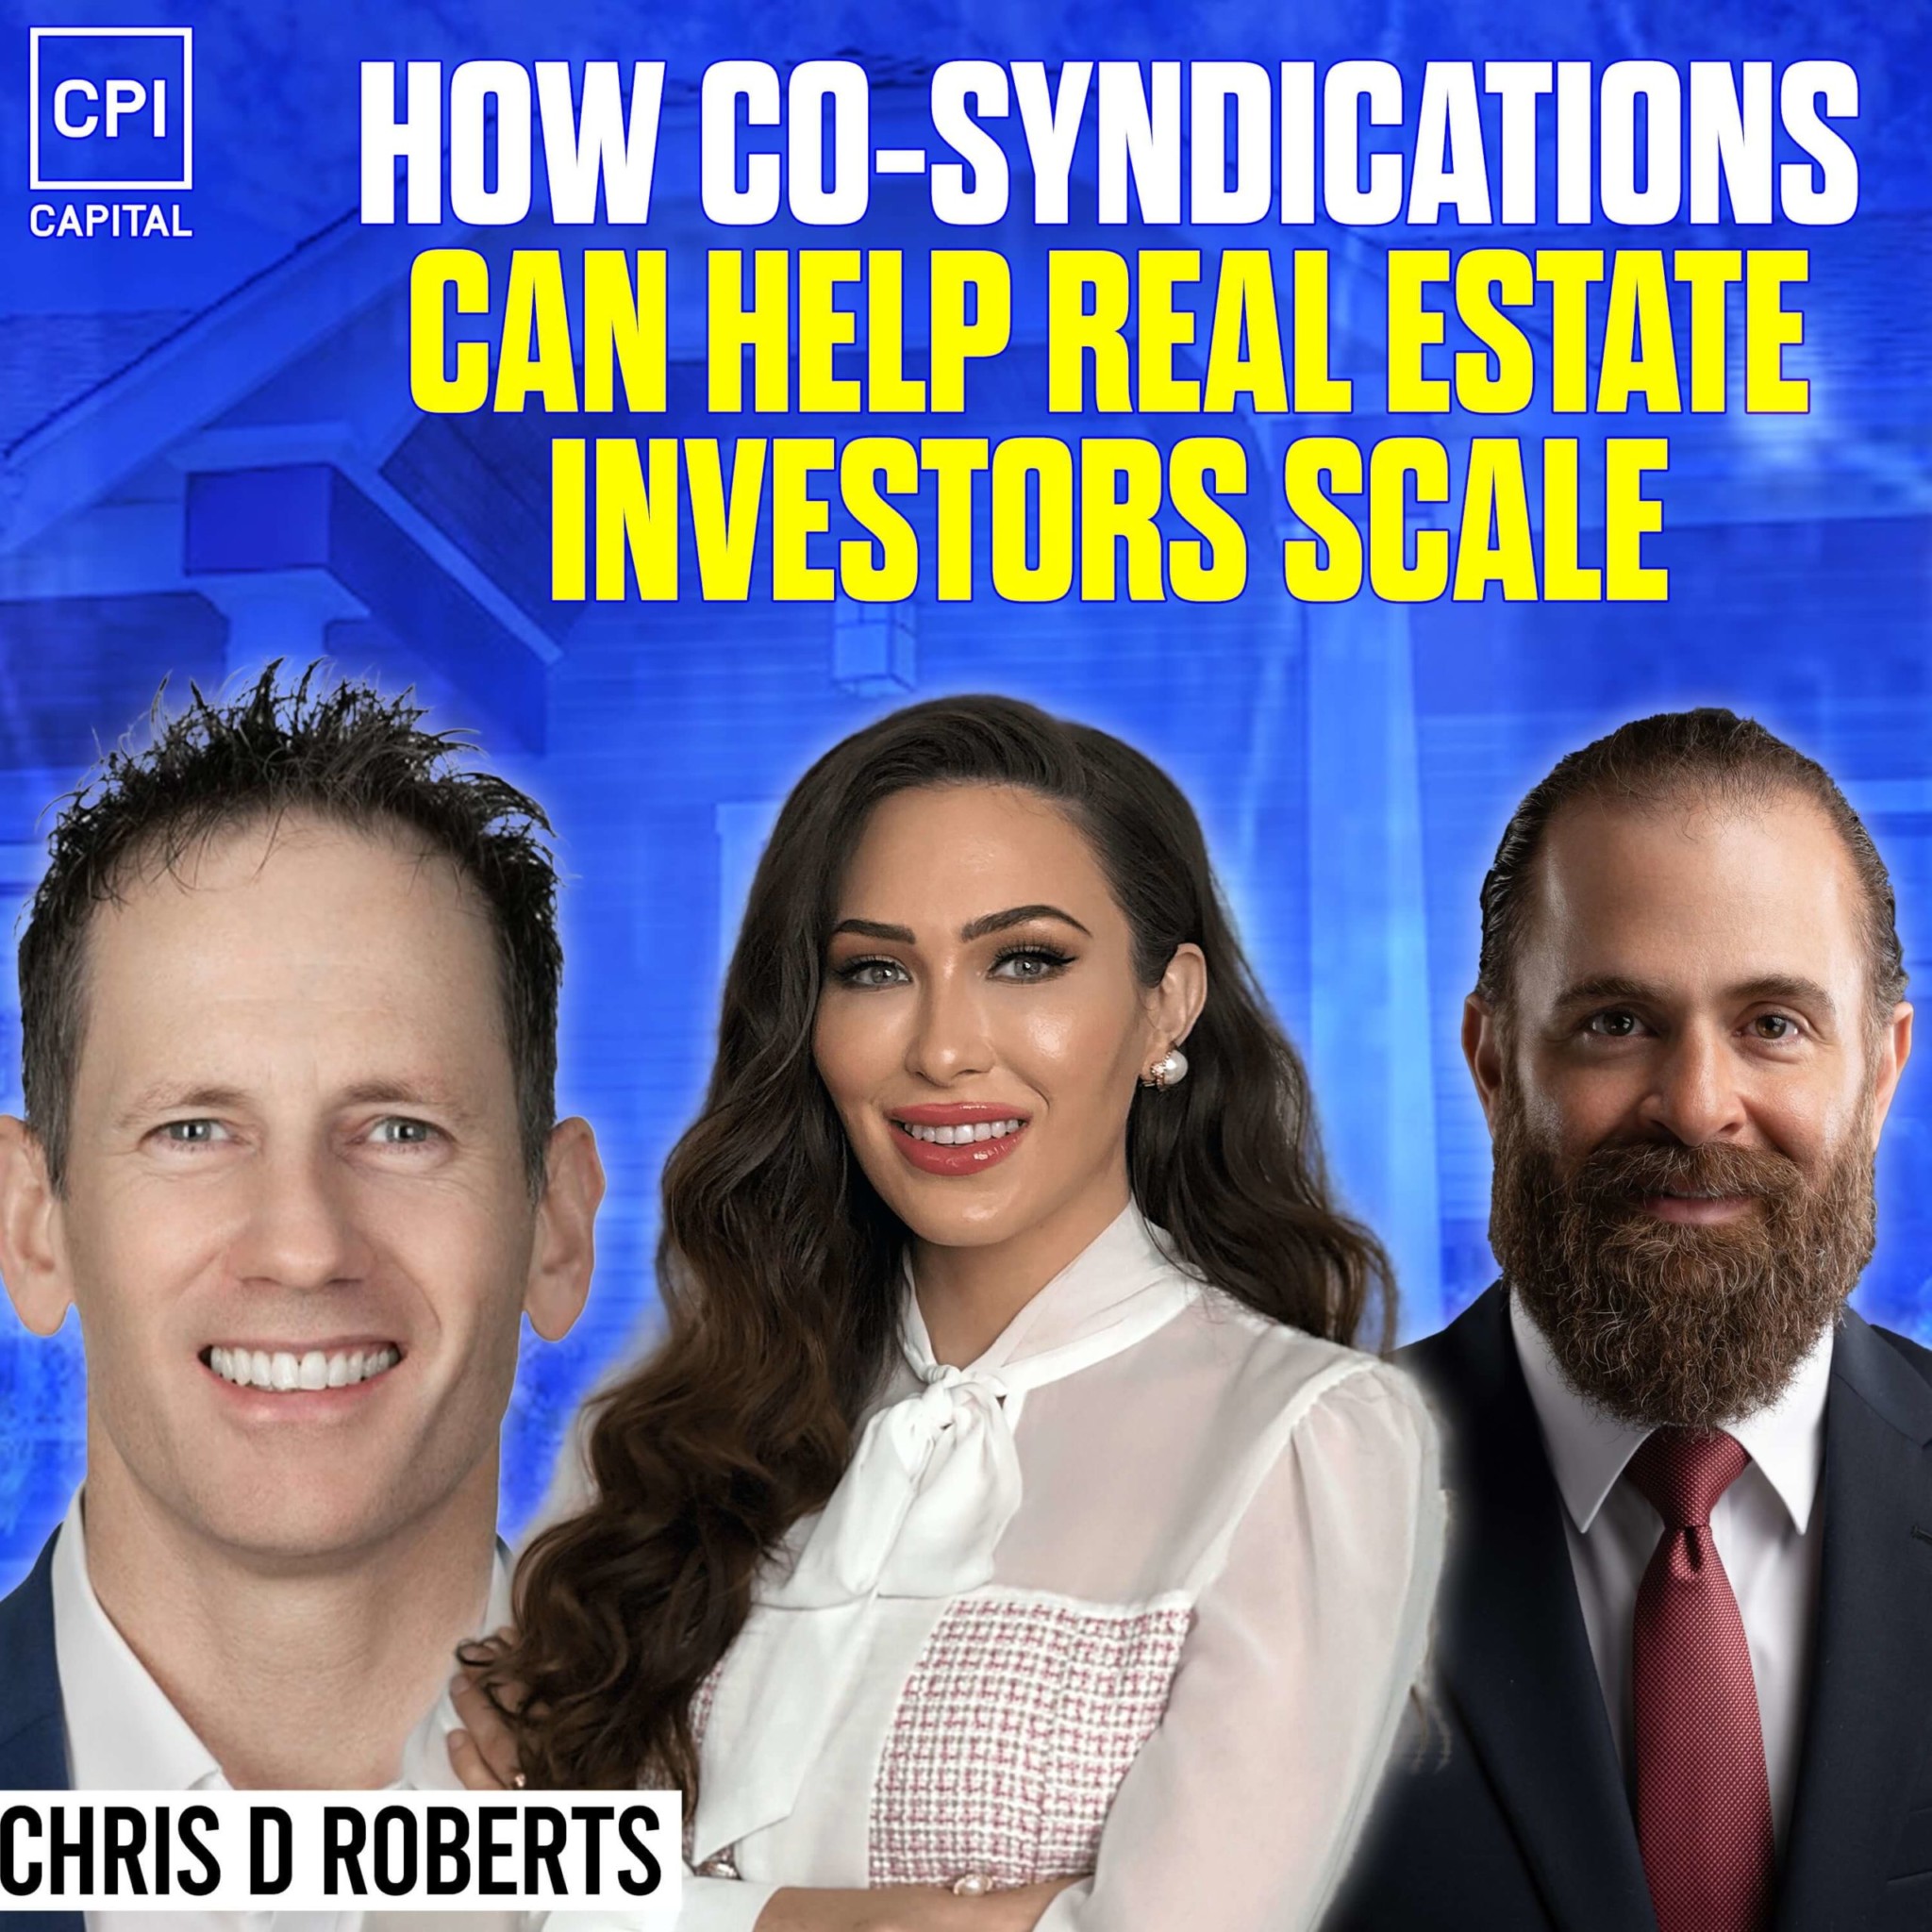 Co-Syndication: The Way To Scaling Your Real Estate Investments With Chris D. Roberts